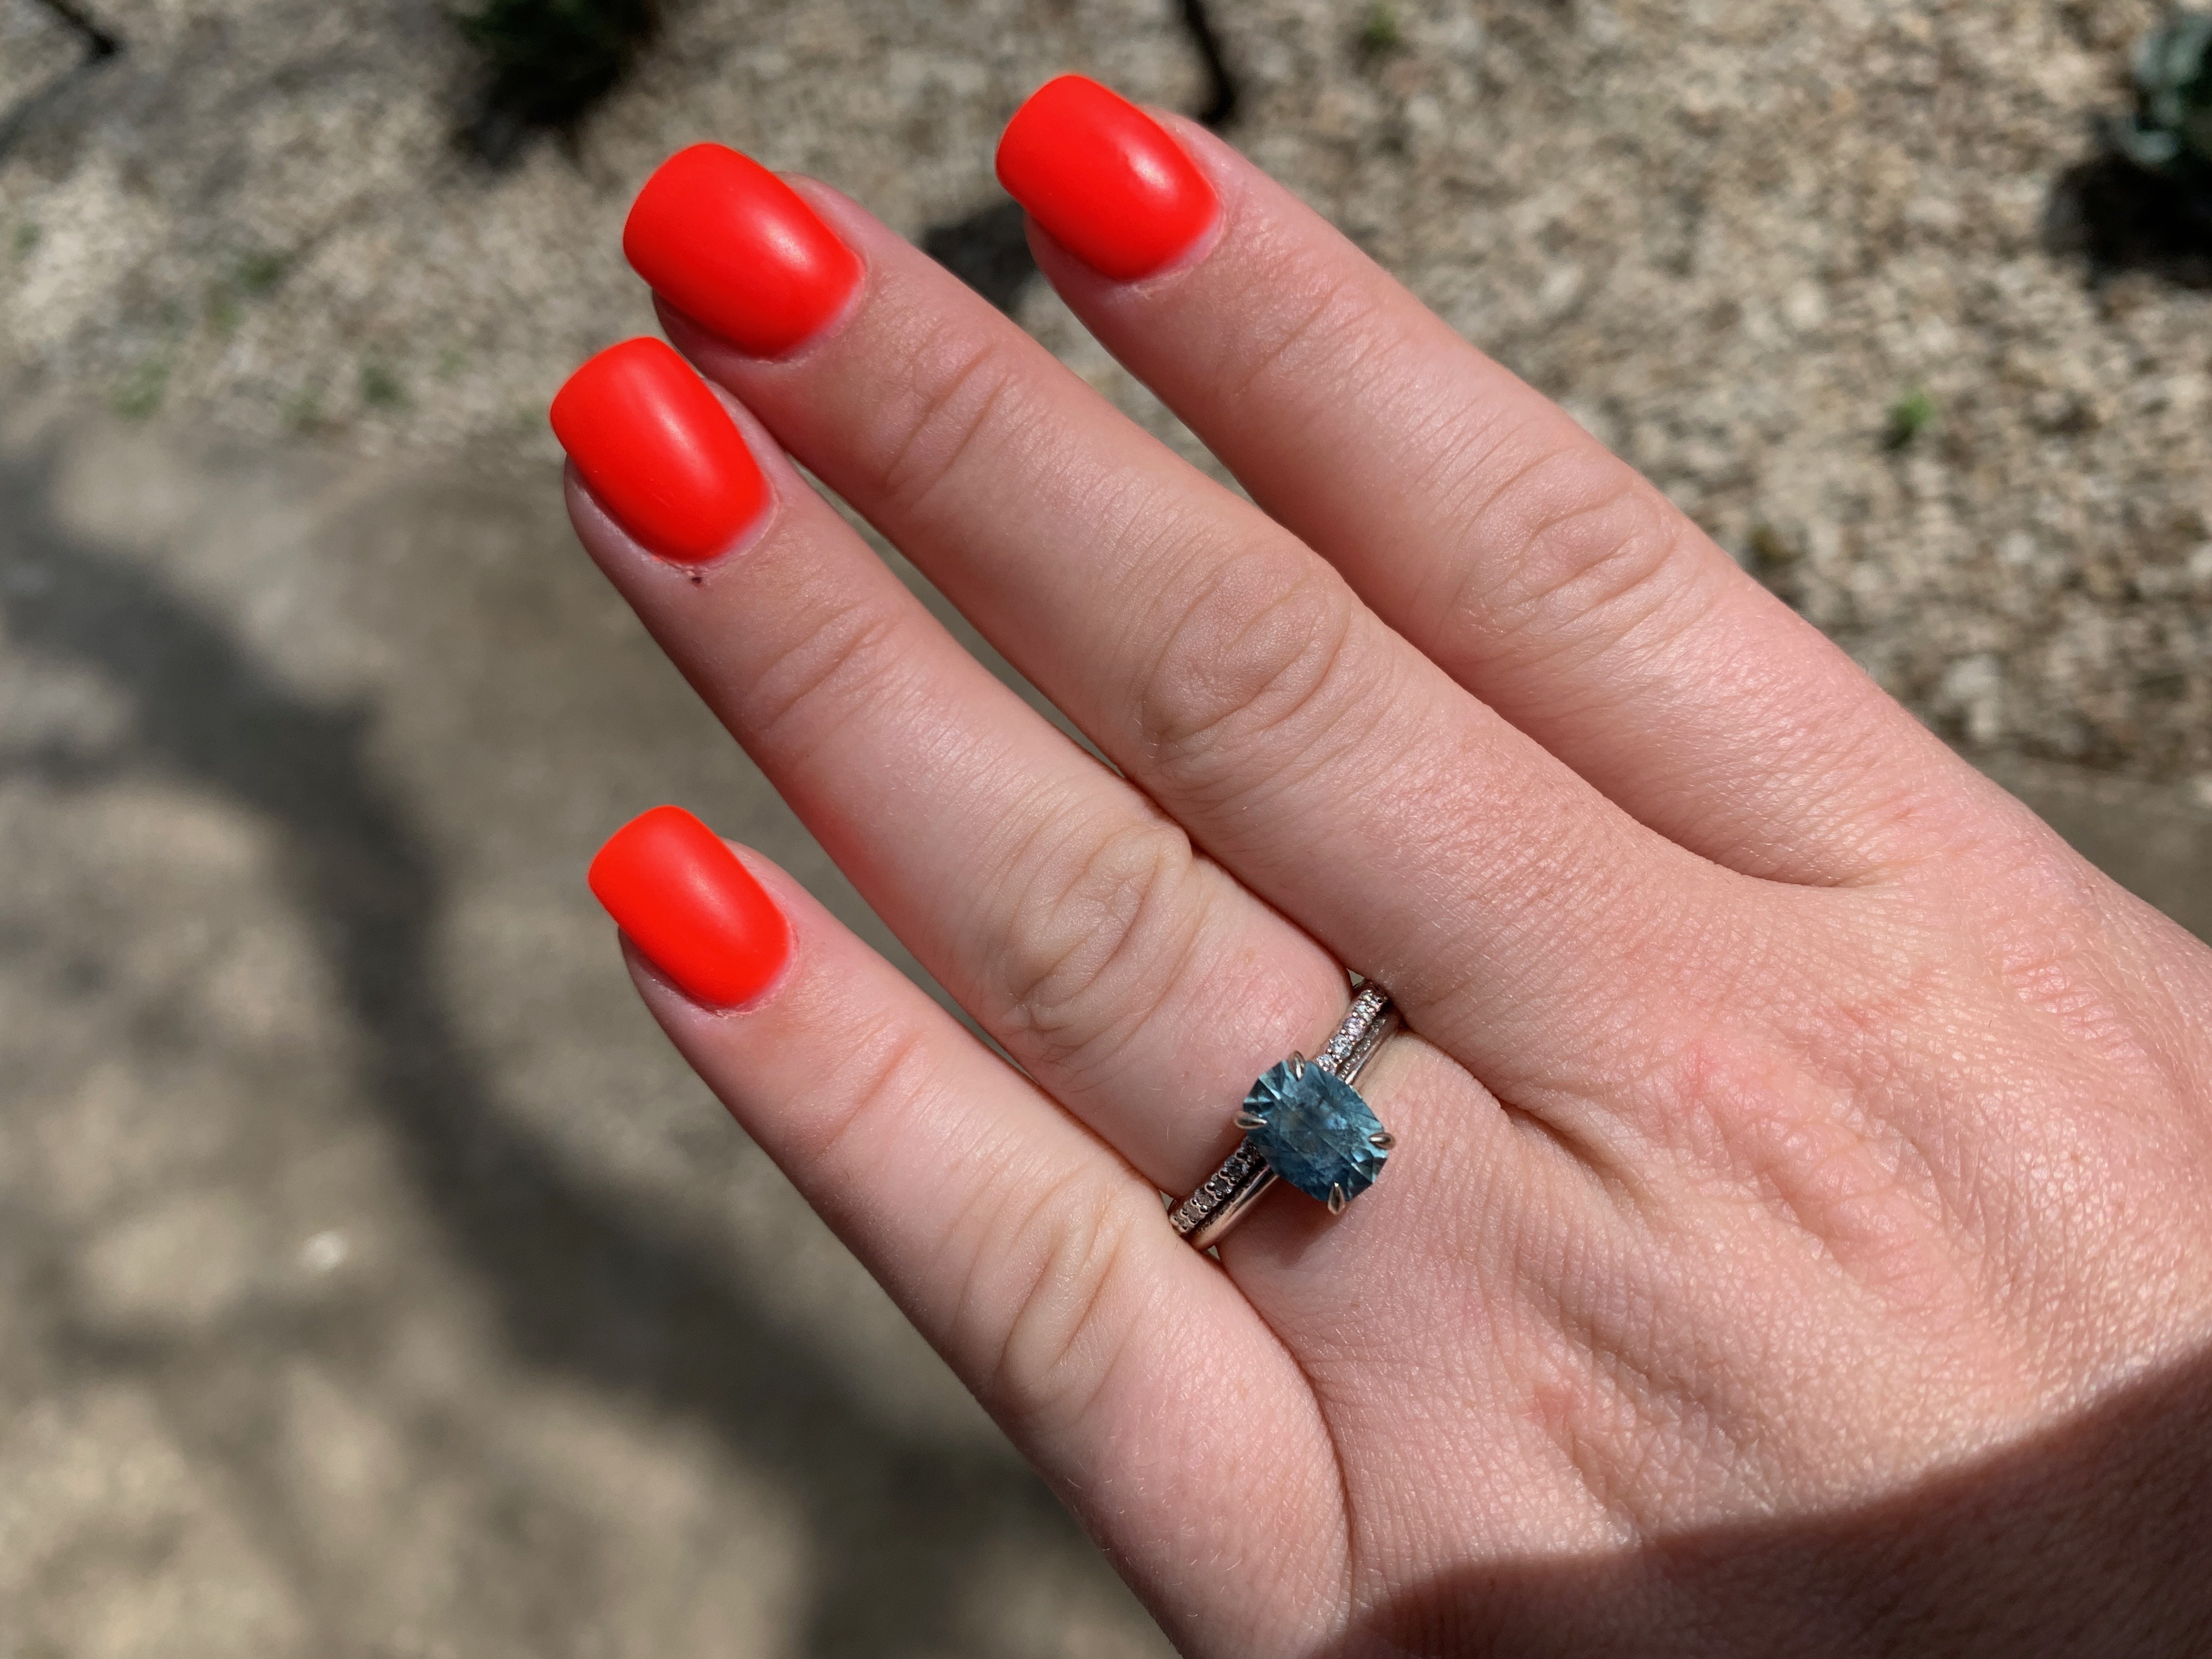 A photo from a customer review featuring a "Tiara" ring in 18k white gold with 2.85-carat Montana sapphire, alongside a"Kivu" Band in 18k white gold